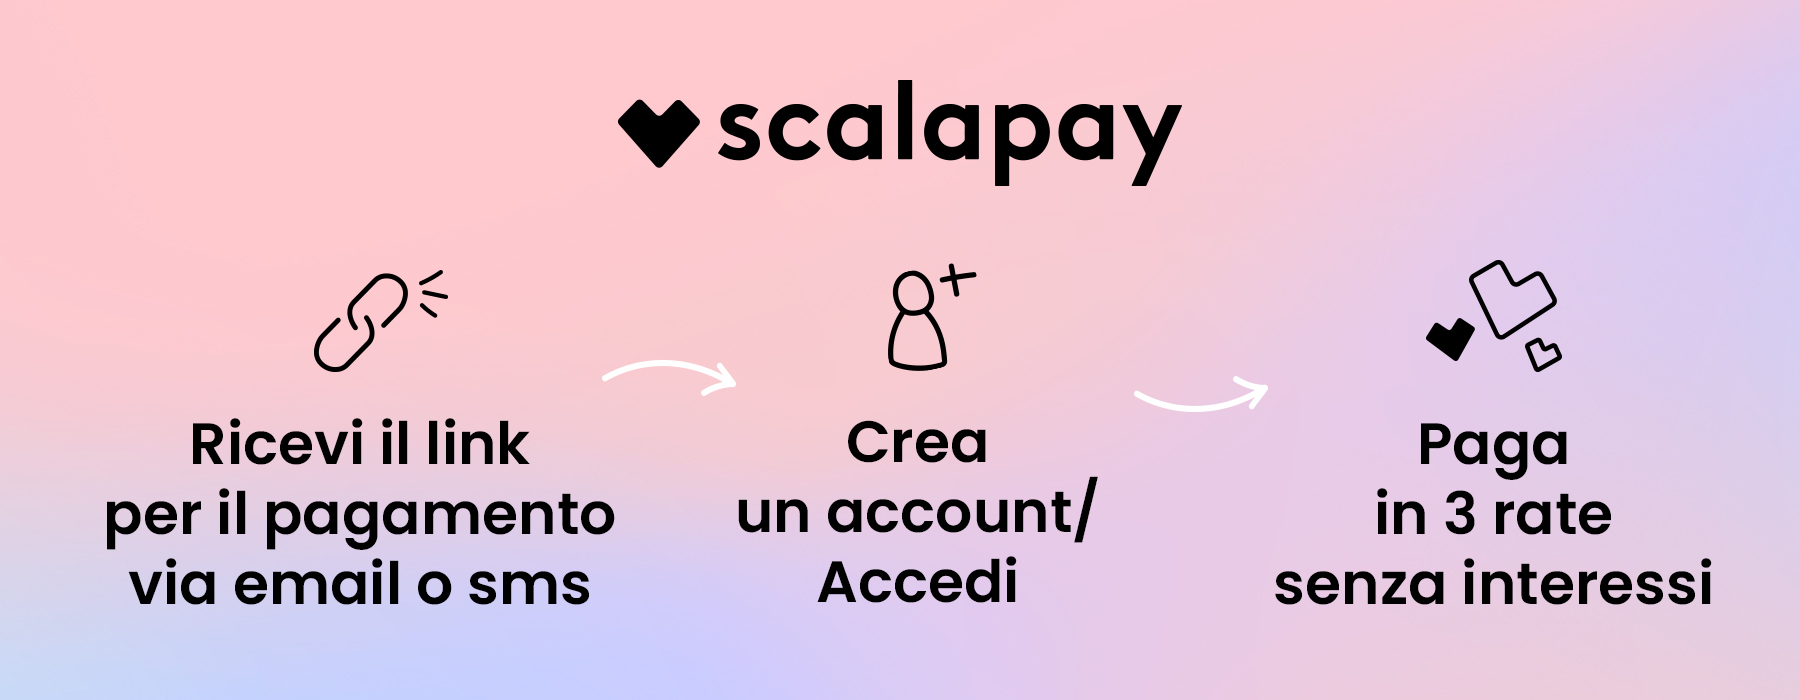 Scalapay mobile